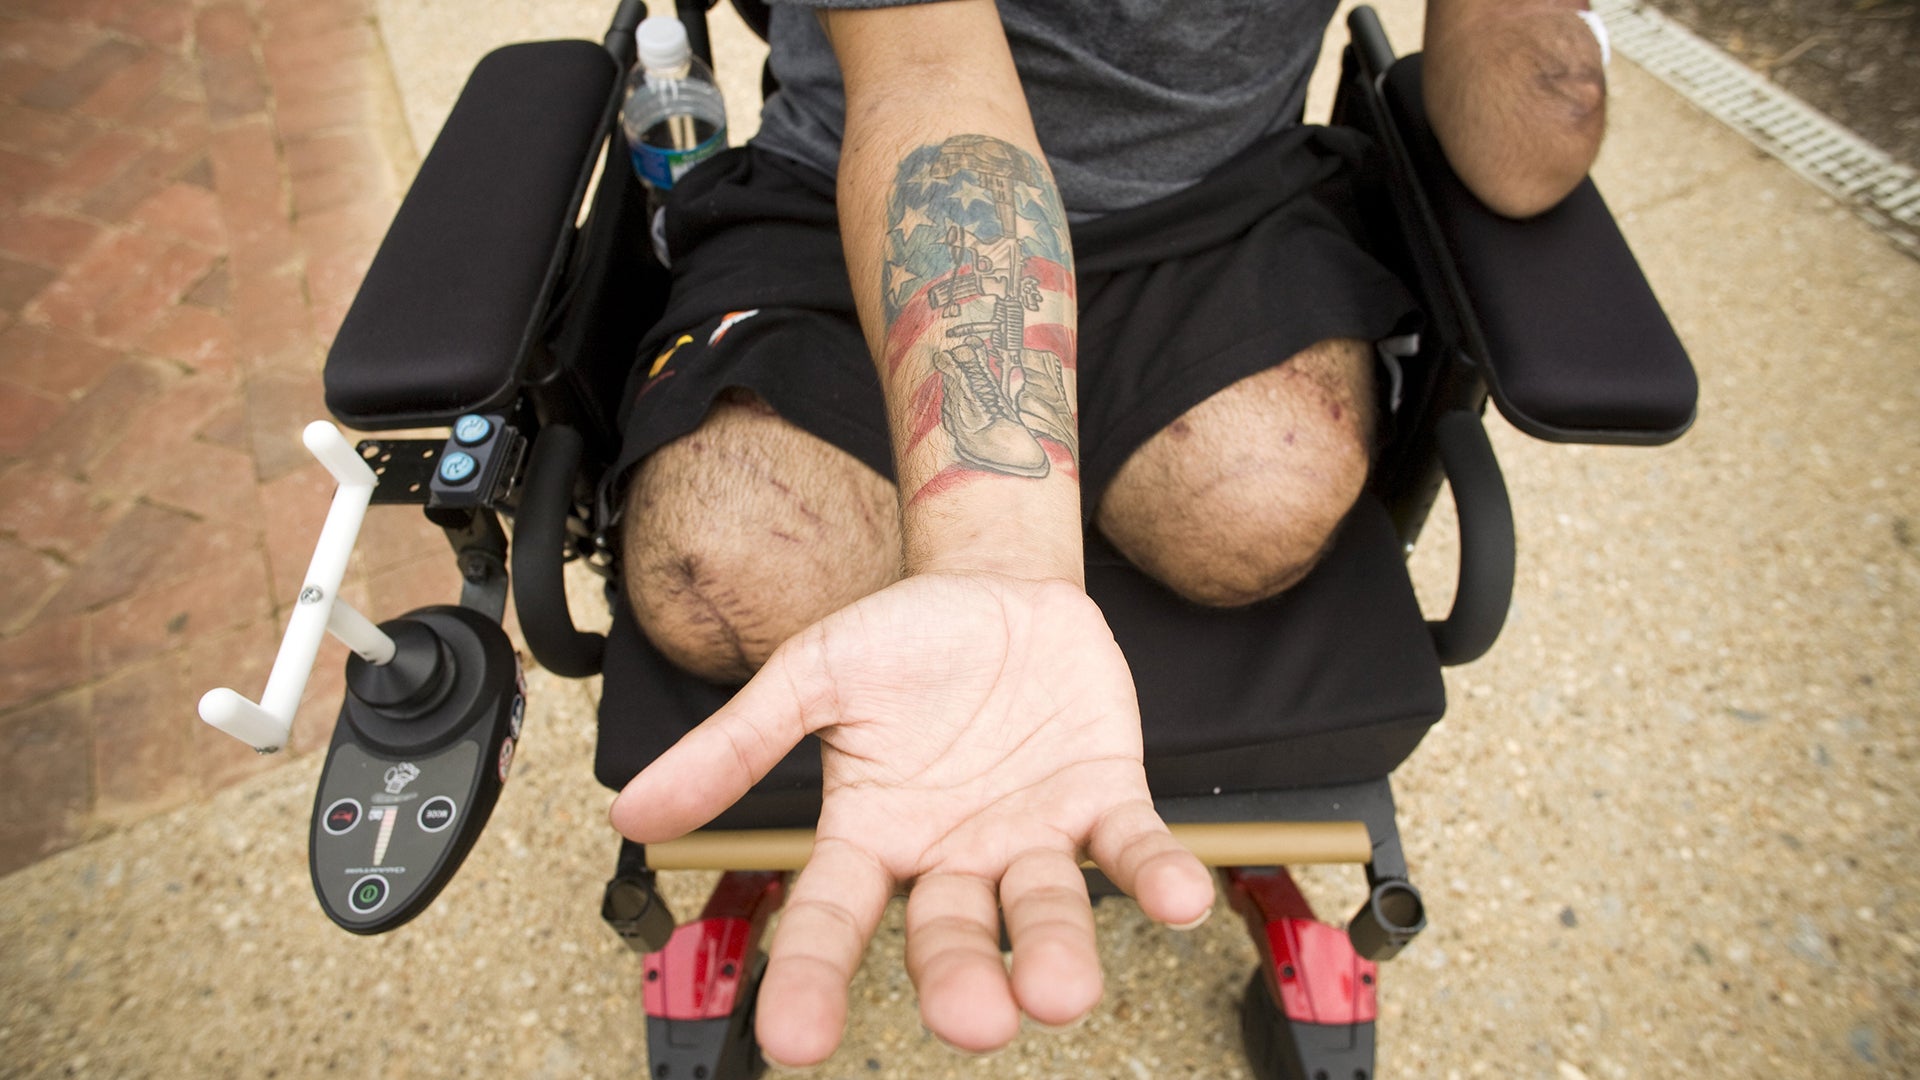 WASHINGTON, DC - JULY 30: Iraq war veteran SGT Luis Rosa-Valentin, who lost both of his legs, left arm and hearing while serving in Iraq shows the tattoo he got in memory of a friend killed in Iraq, at Walter Reed Army Medical Center in Washington, DC on July 30, 2008. His encounter with the improvised explosive device that almost ended his life came in April, during his second tour in the combat zone. Rosa-Valentin is still recovering at Walter Reed. He speaks of his time in the Army with no regrets. " I was born for it, really, I loved every second of it, he said. Despite my injuries, I still don't care, I love it. I love the infantry, I love the life that I led. I wouldn't trade a second of it for anything else".  (Photo by David S. Holloway/Getty Images)